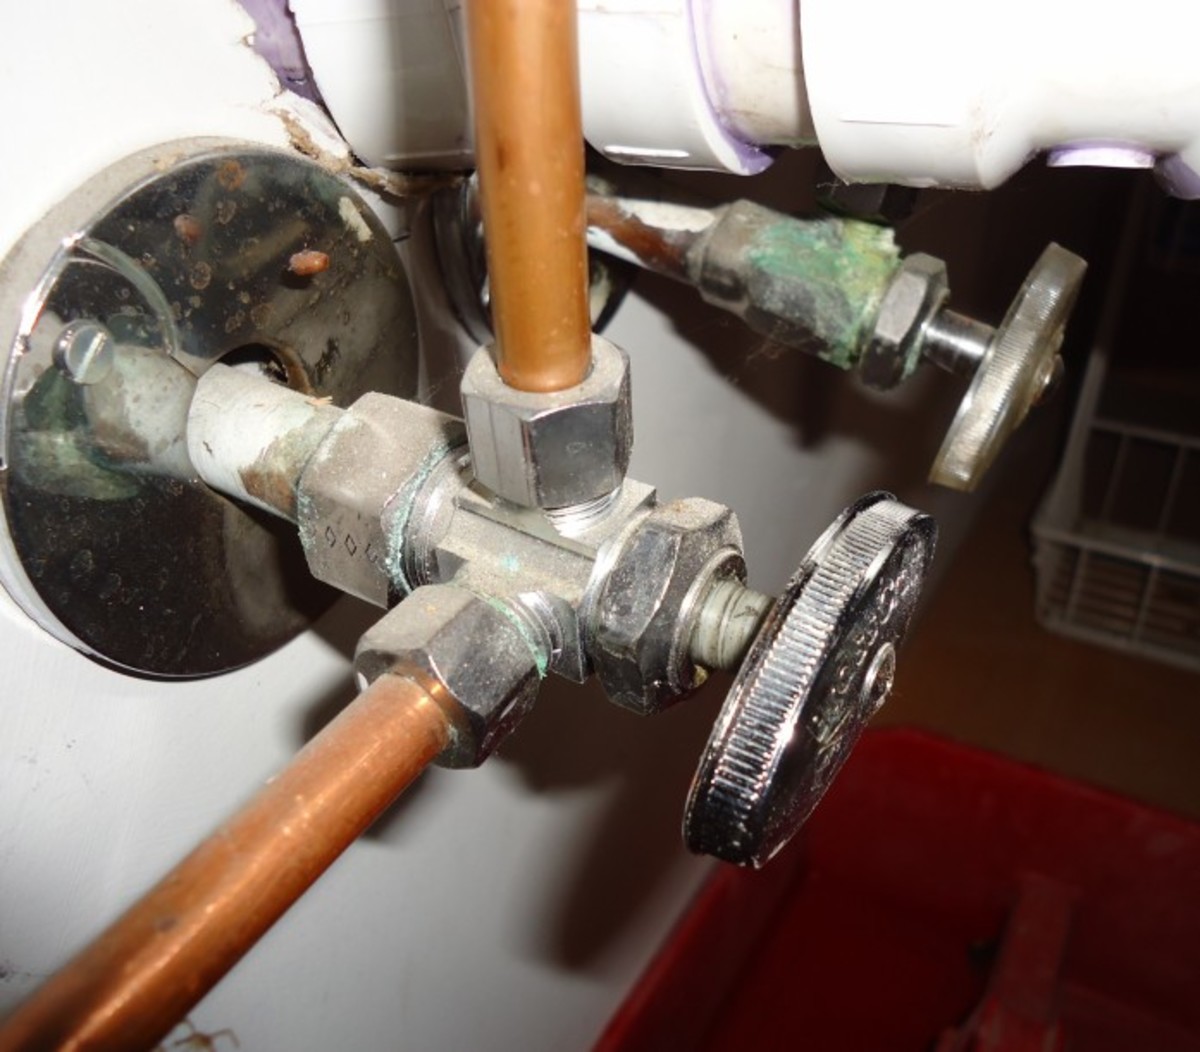 How to Turn off Your Home's Main Water Valve